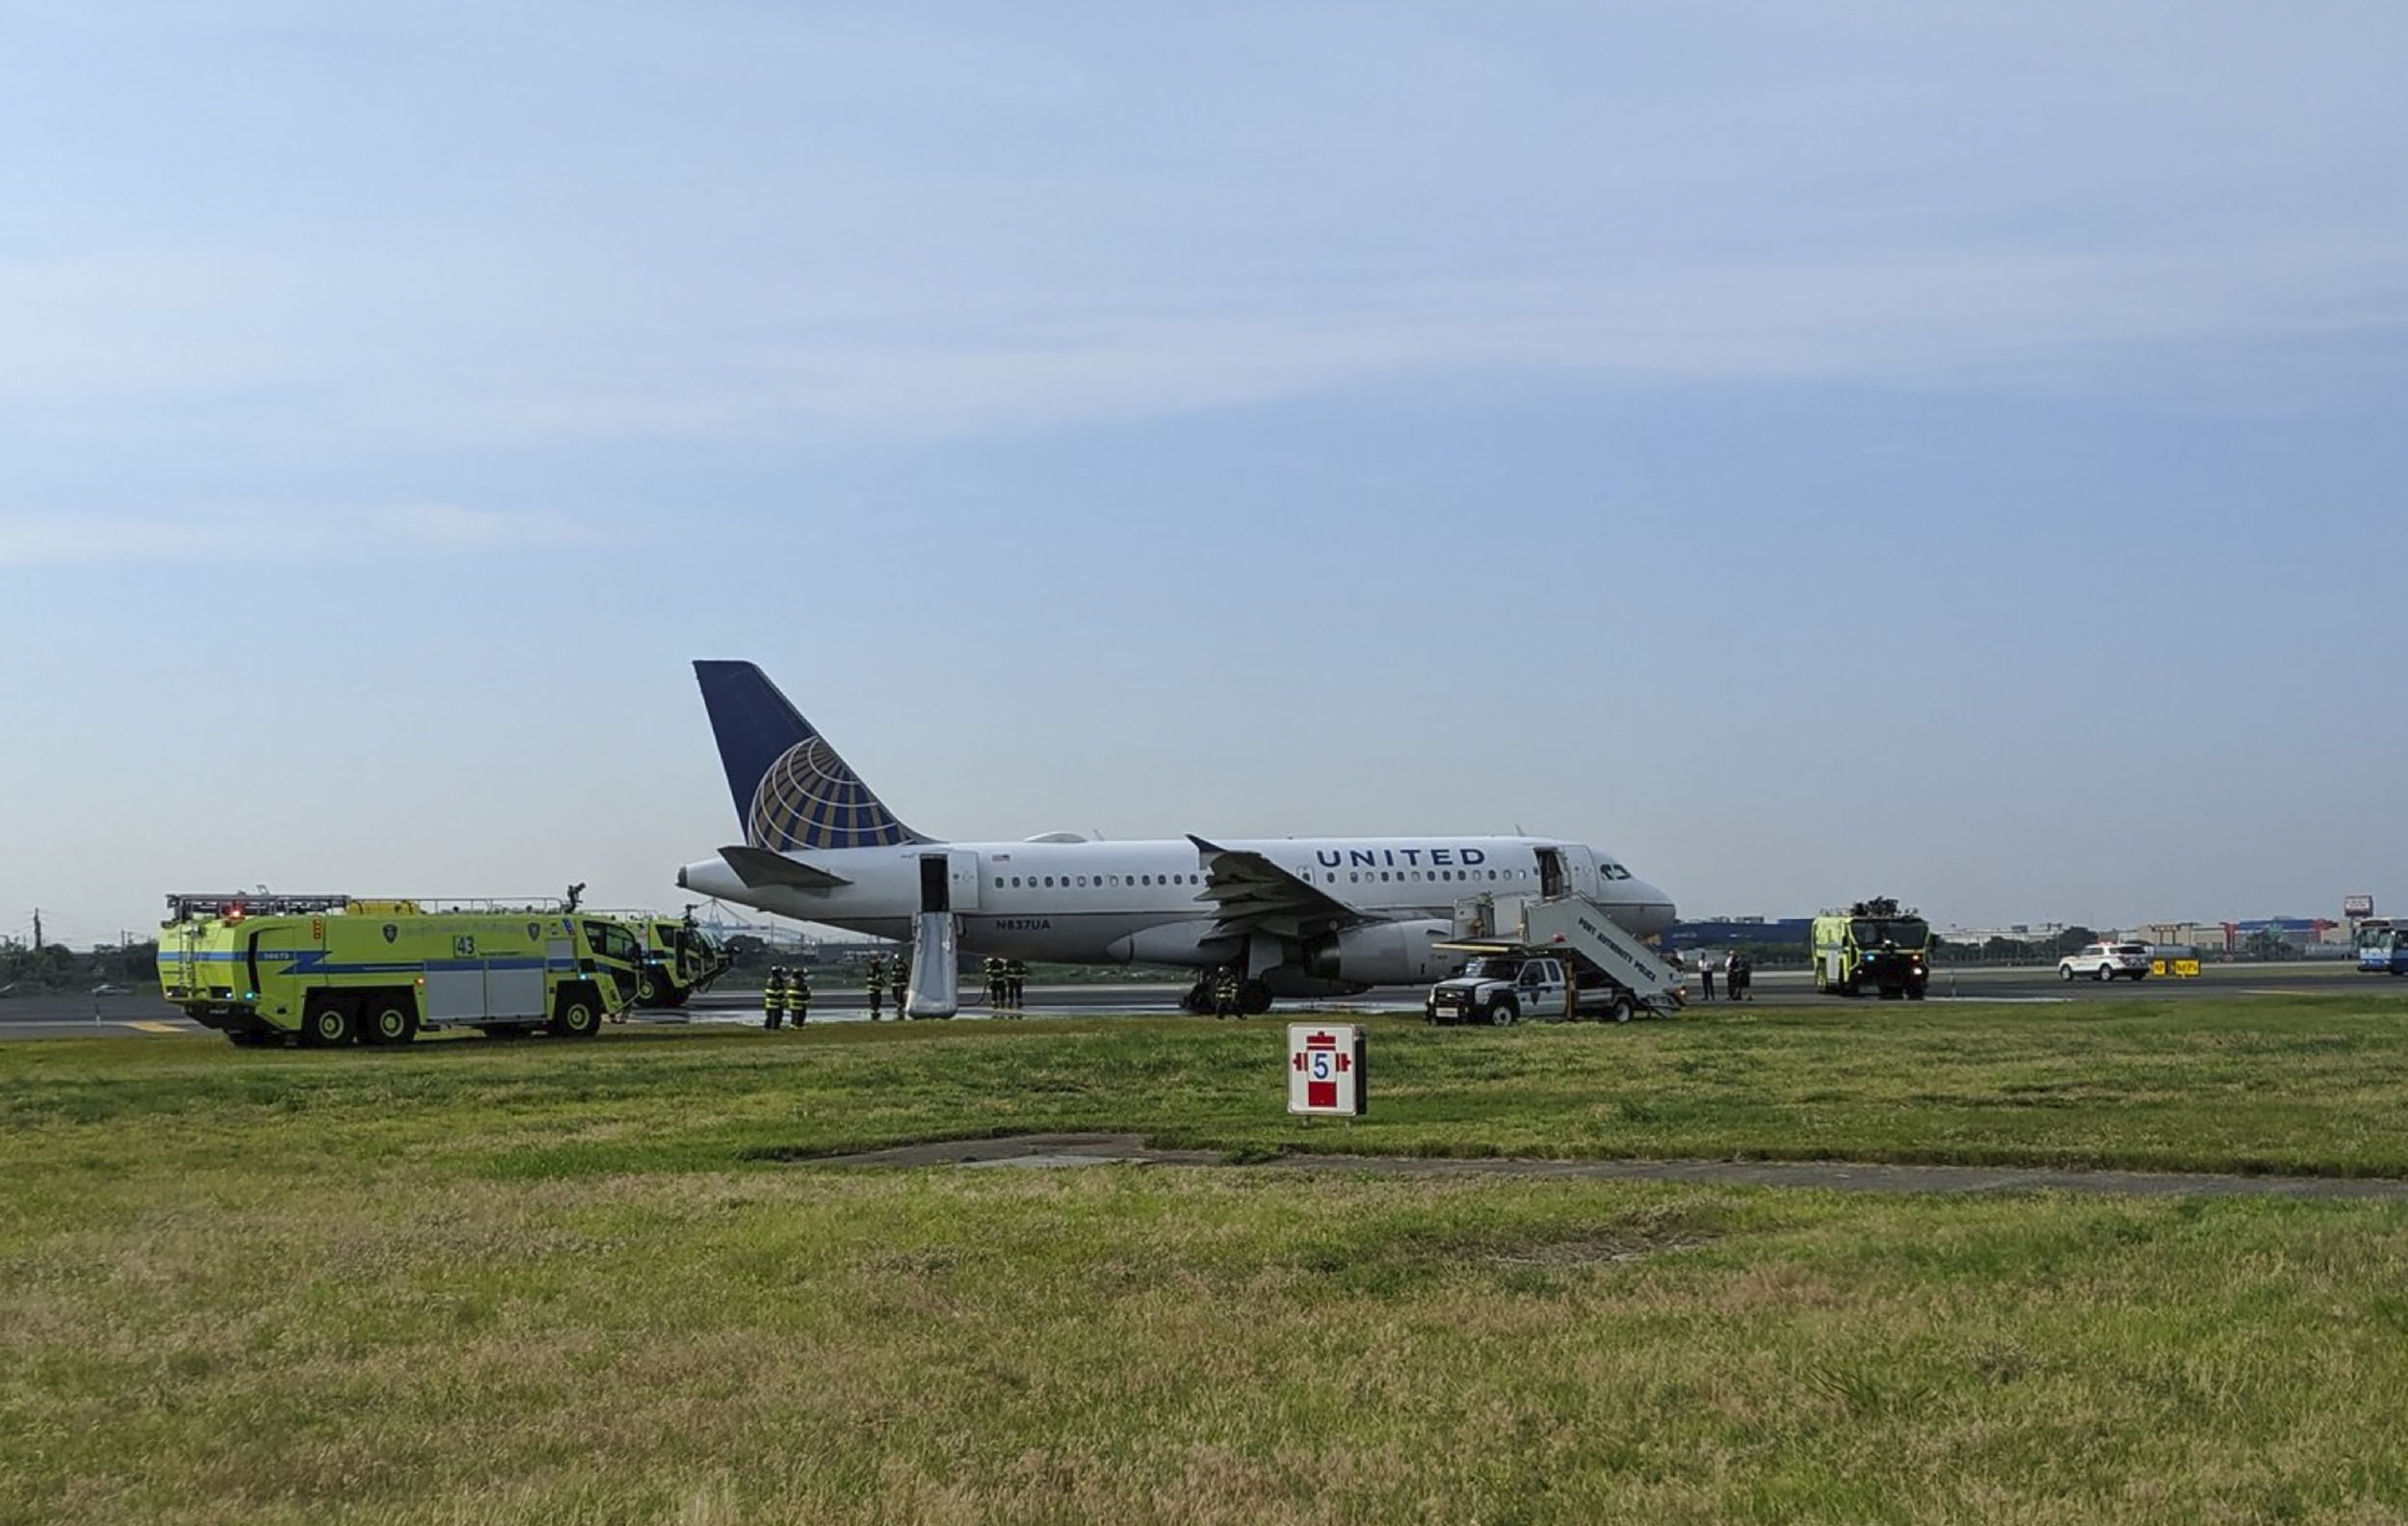 PHOTO: This photo provided by John Murray shows a United flight sitting on the runway after making an emergency landing on June 29, 2019 at Newark Liberty Airport in Newark, N.J.